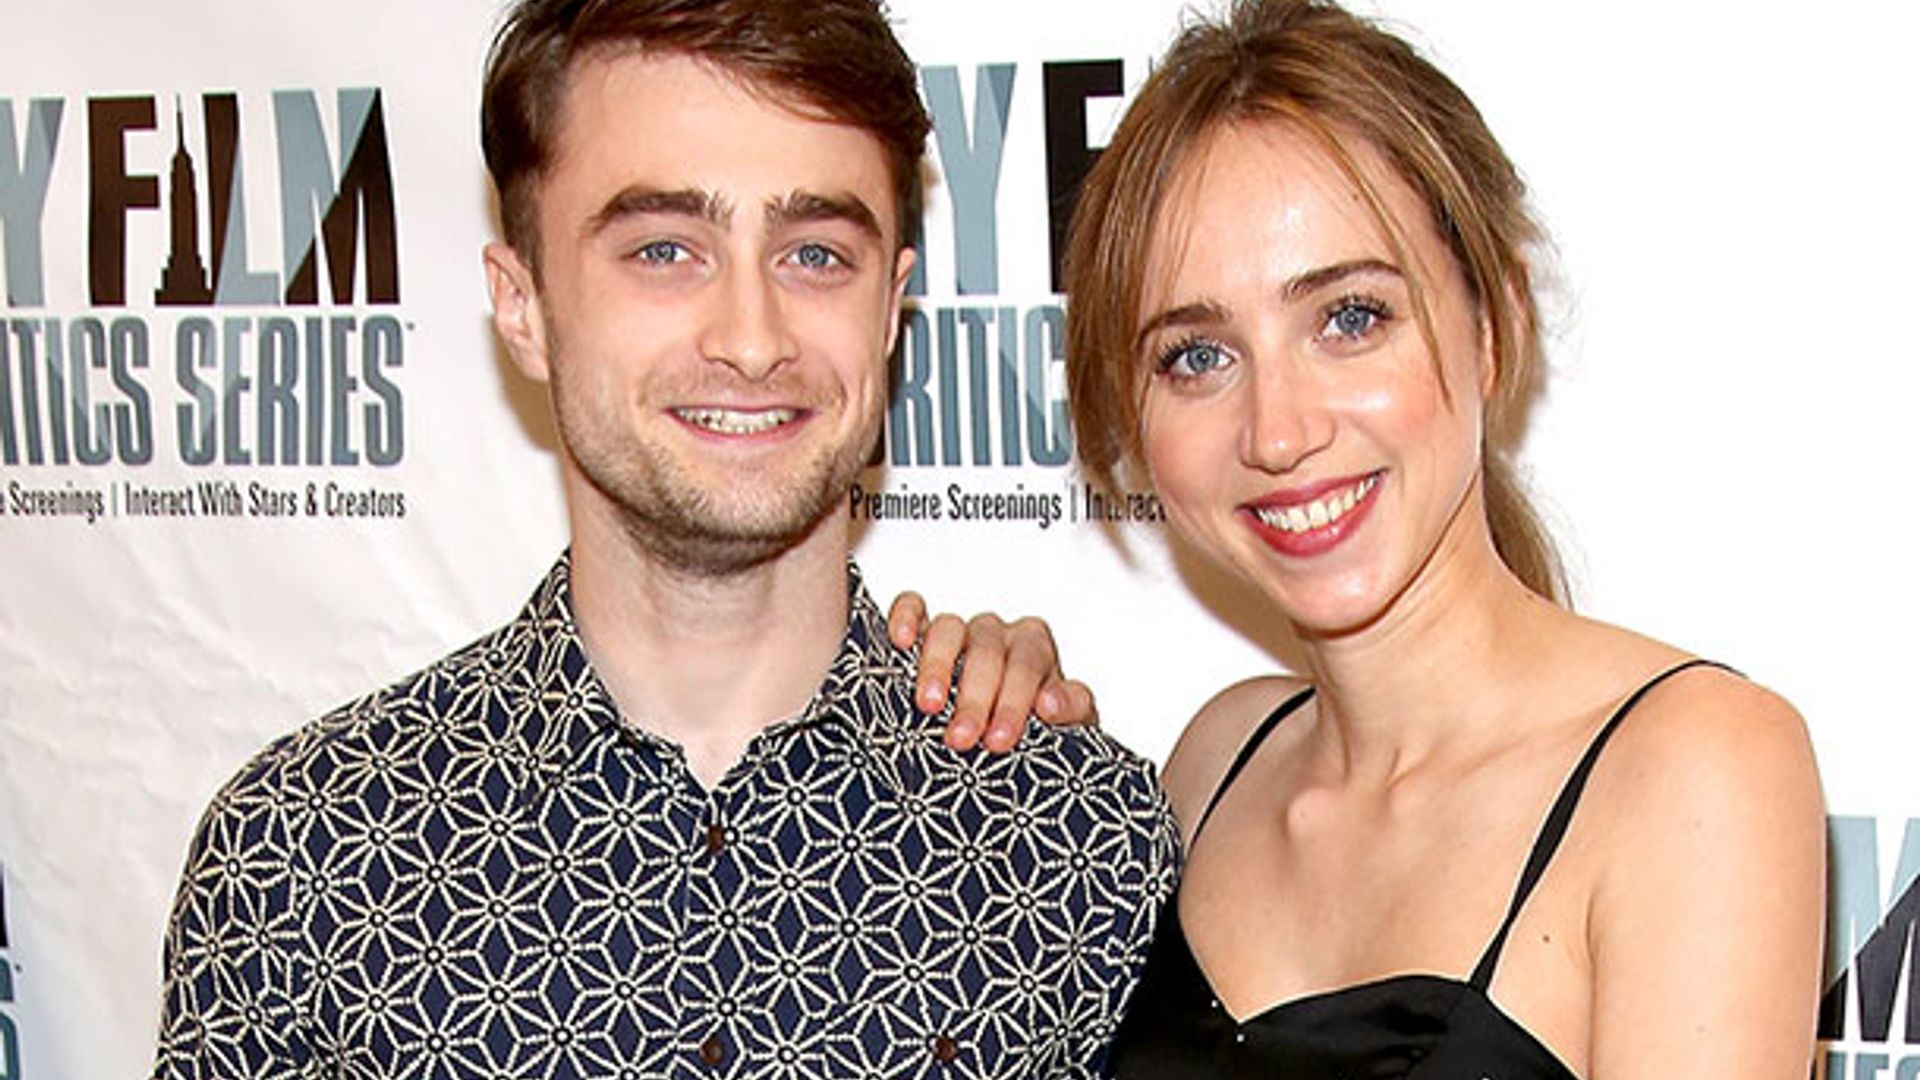 Daniel Radcliffe says he's unlikely to play Harry Potter again in wake of J.K. Rowling's new short story